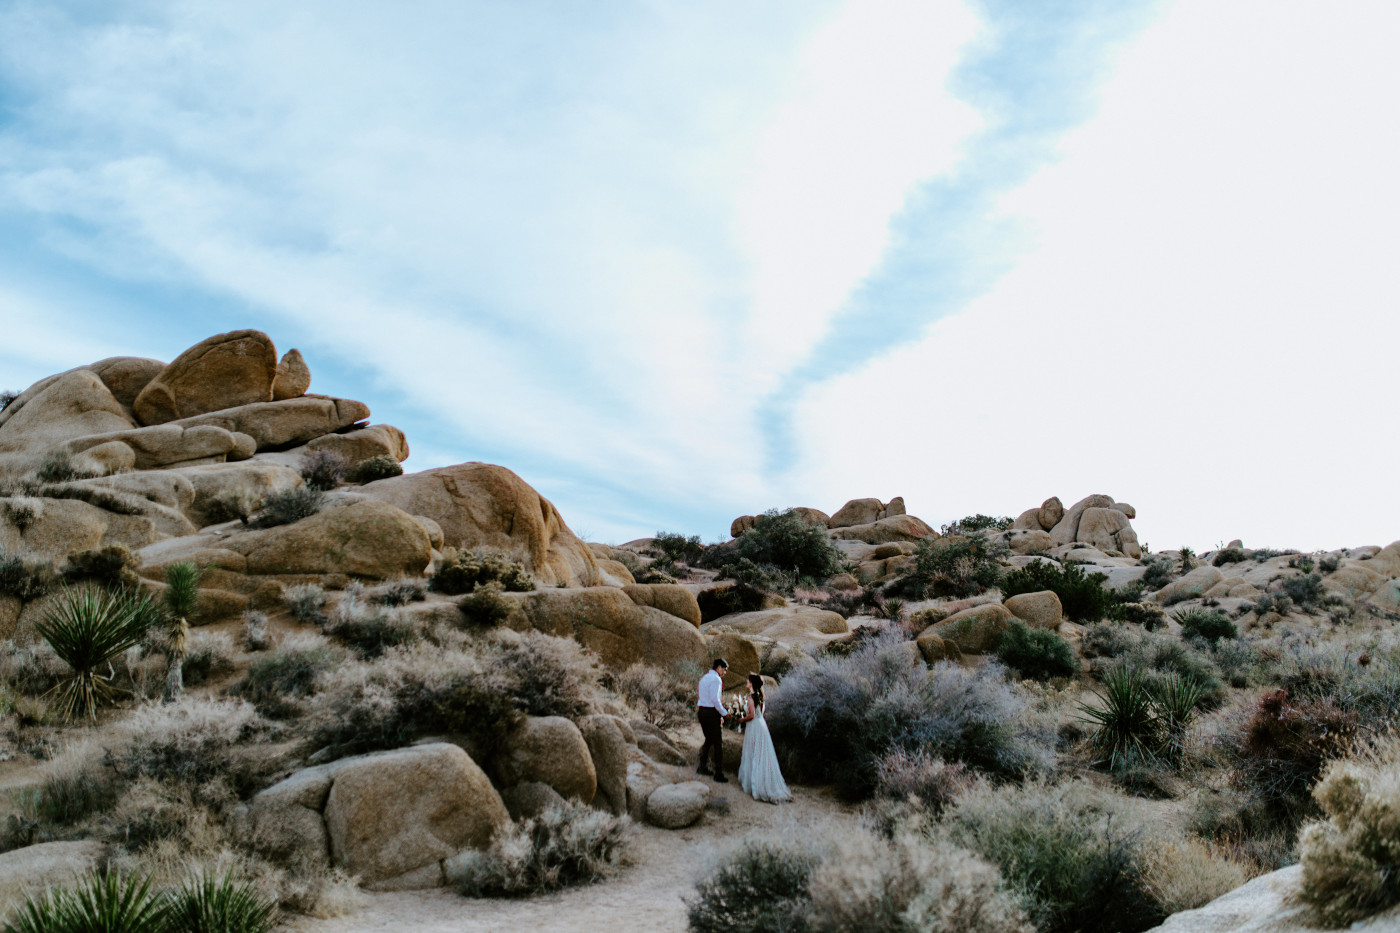 Shelby and Zack stand amongst the boulders in Joshua Tree National Park.